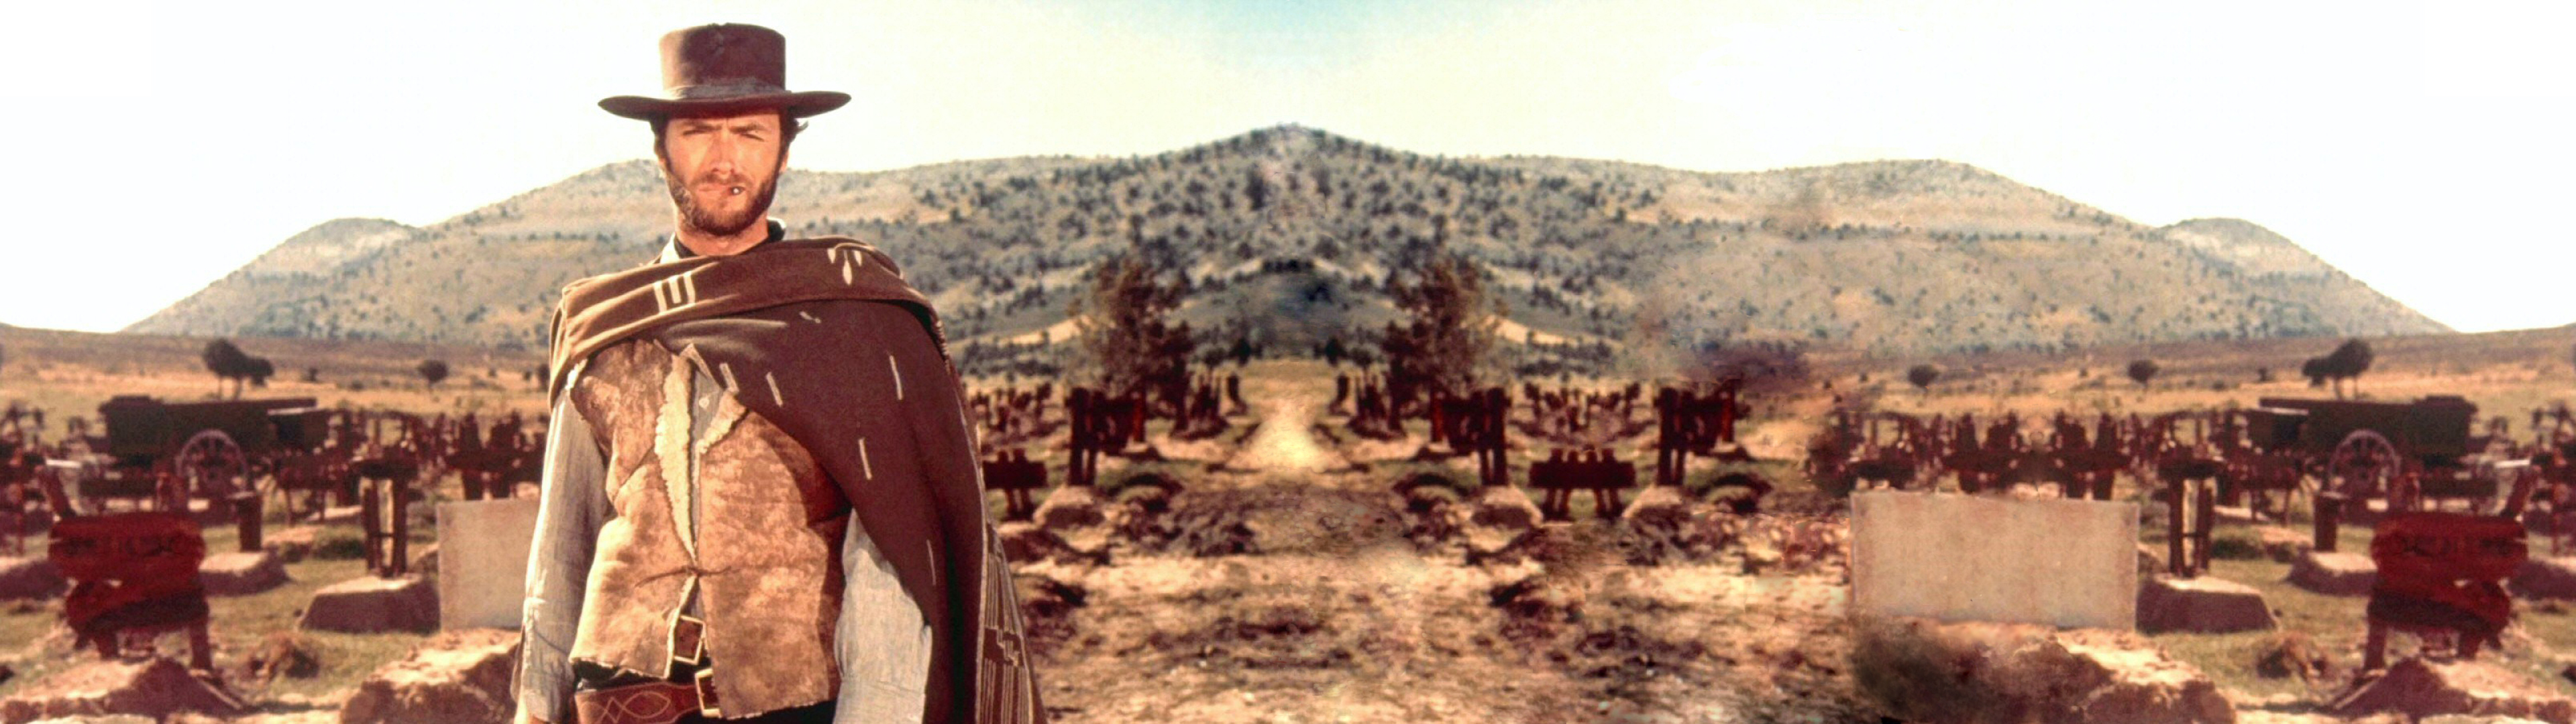 And The Ugly Western Clint Eastwood Multi Dual G Wallpaper Background